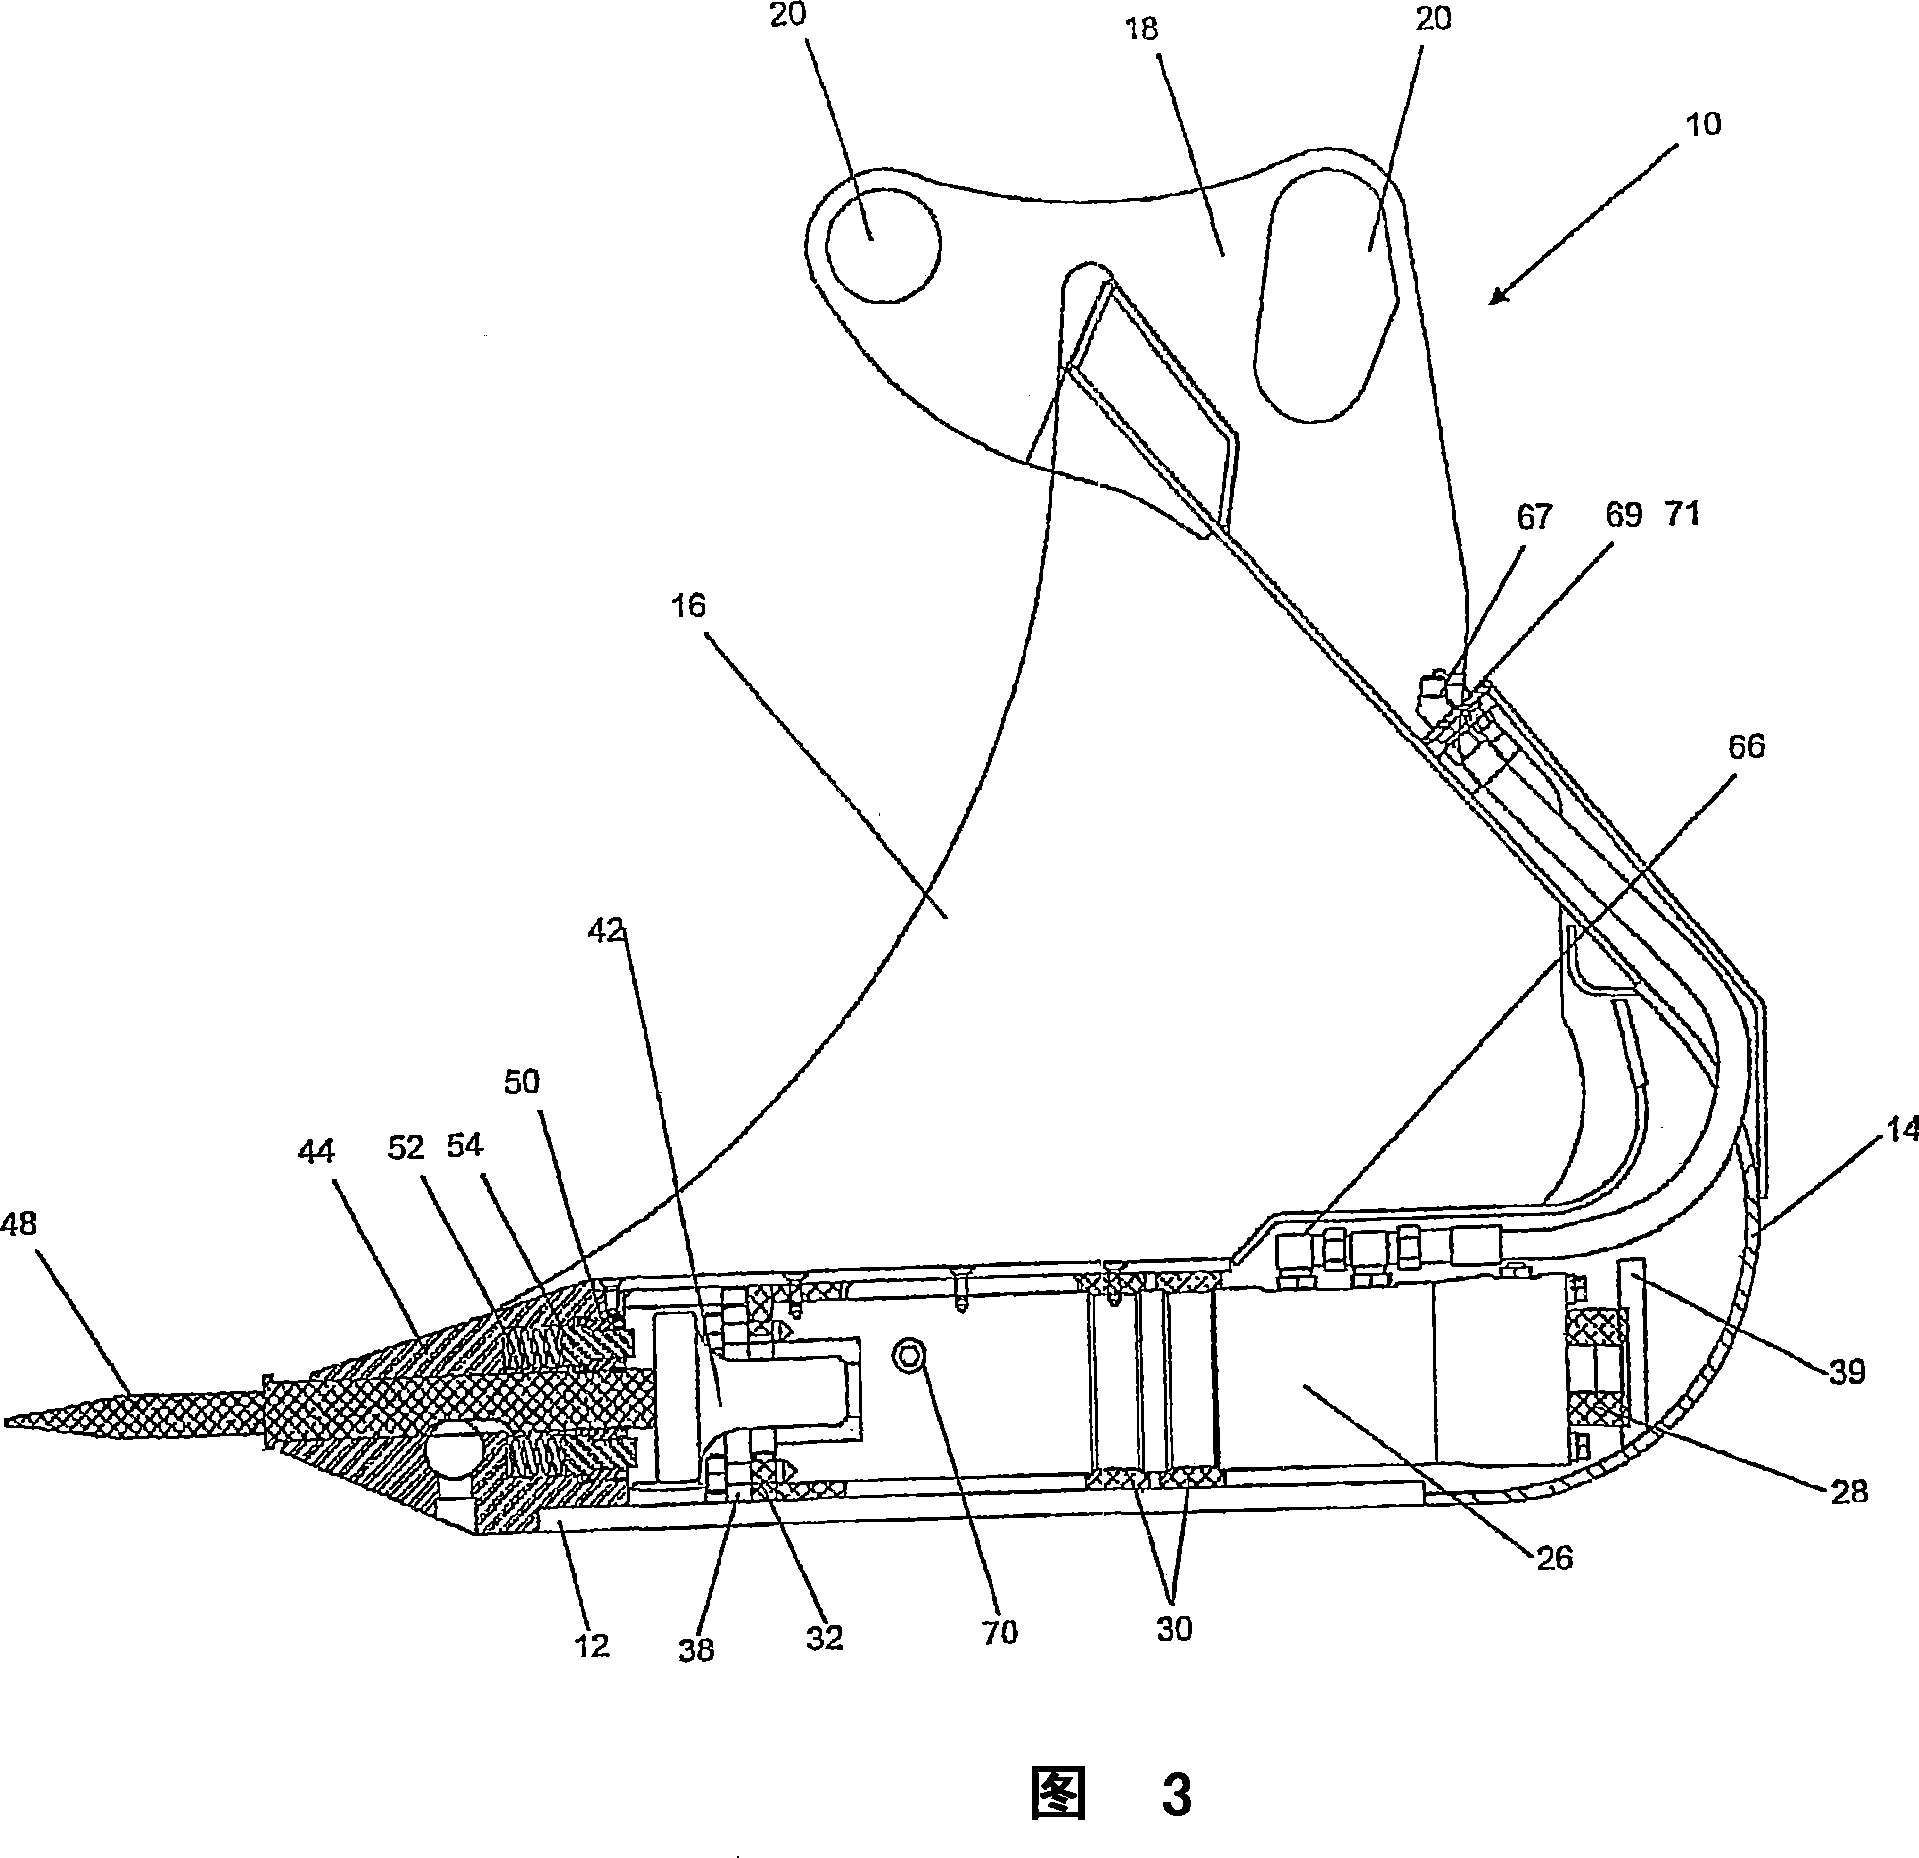 Hydraulically actuated impact apparatus